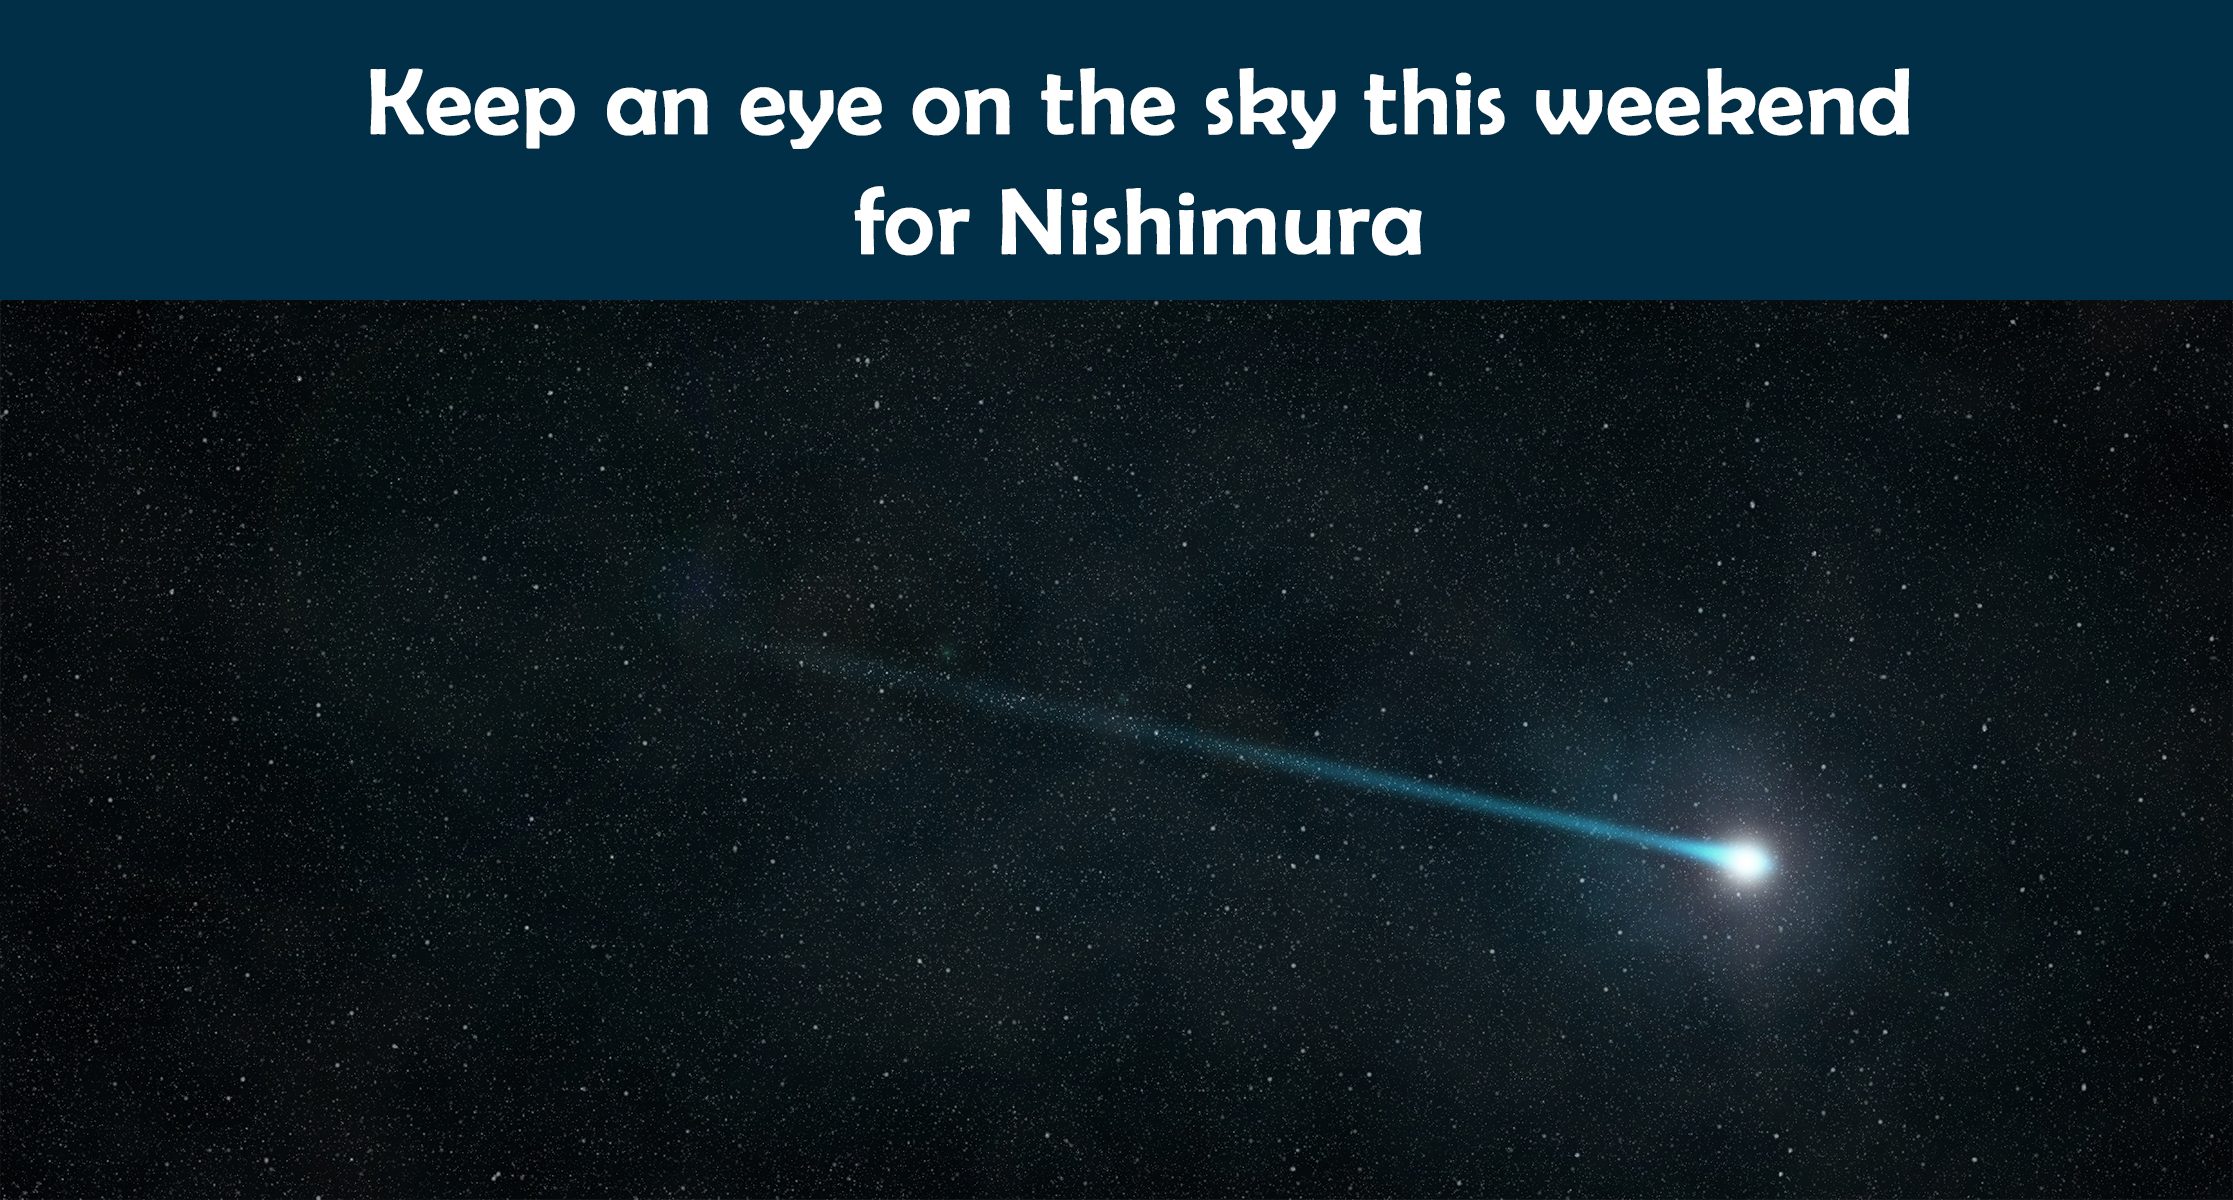 Keep an eye on the sky this weekend for Nishimura